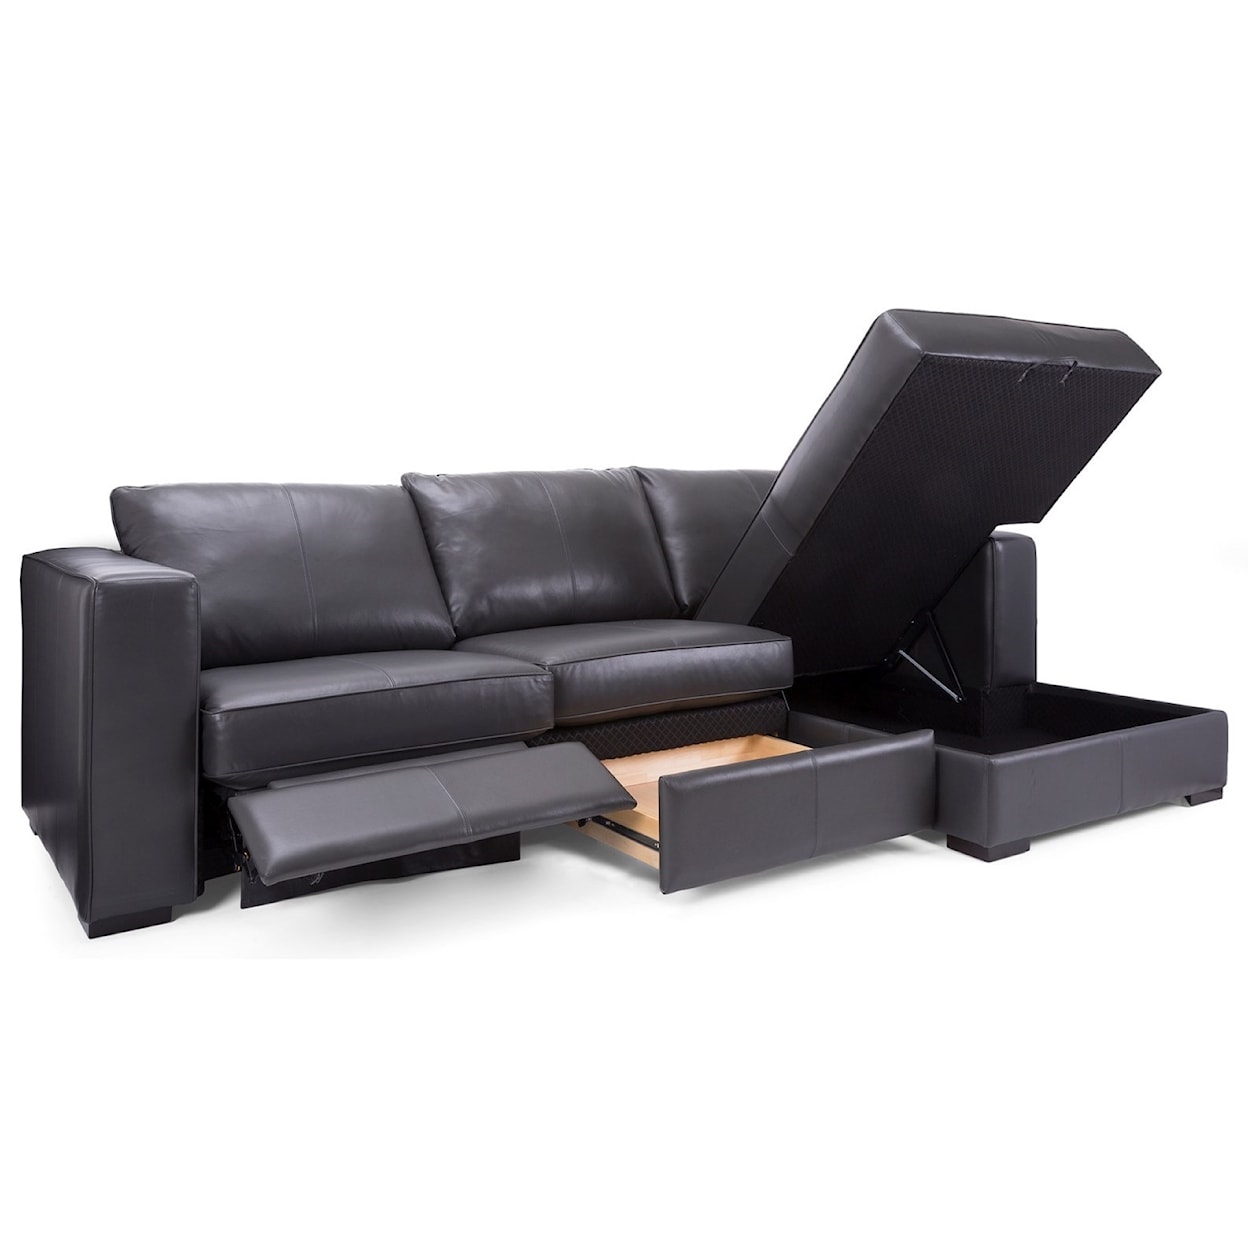 Taelor Designs Braden Reclining Sofa with Chaise